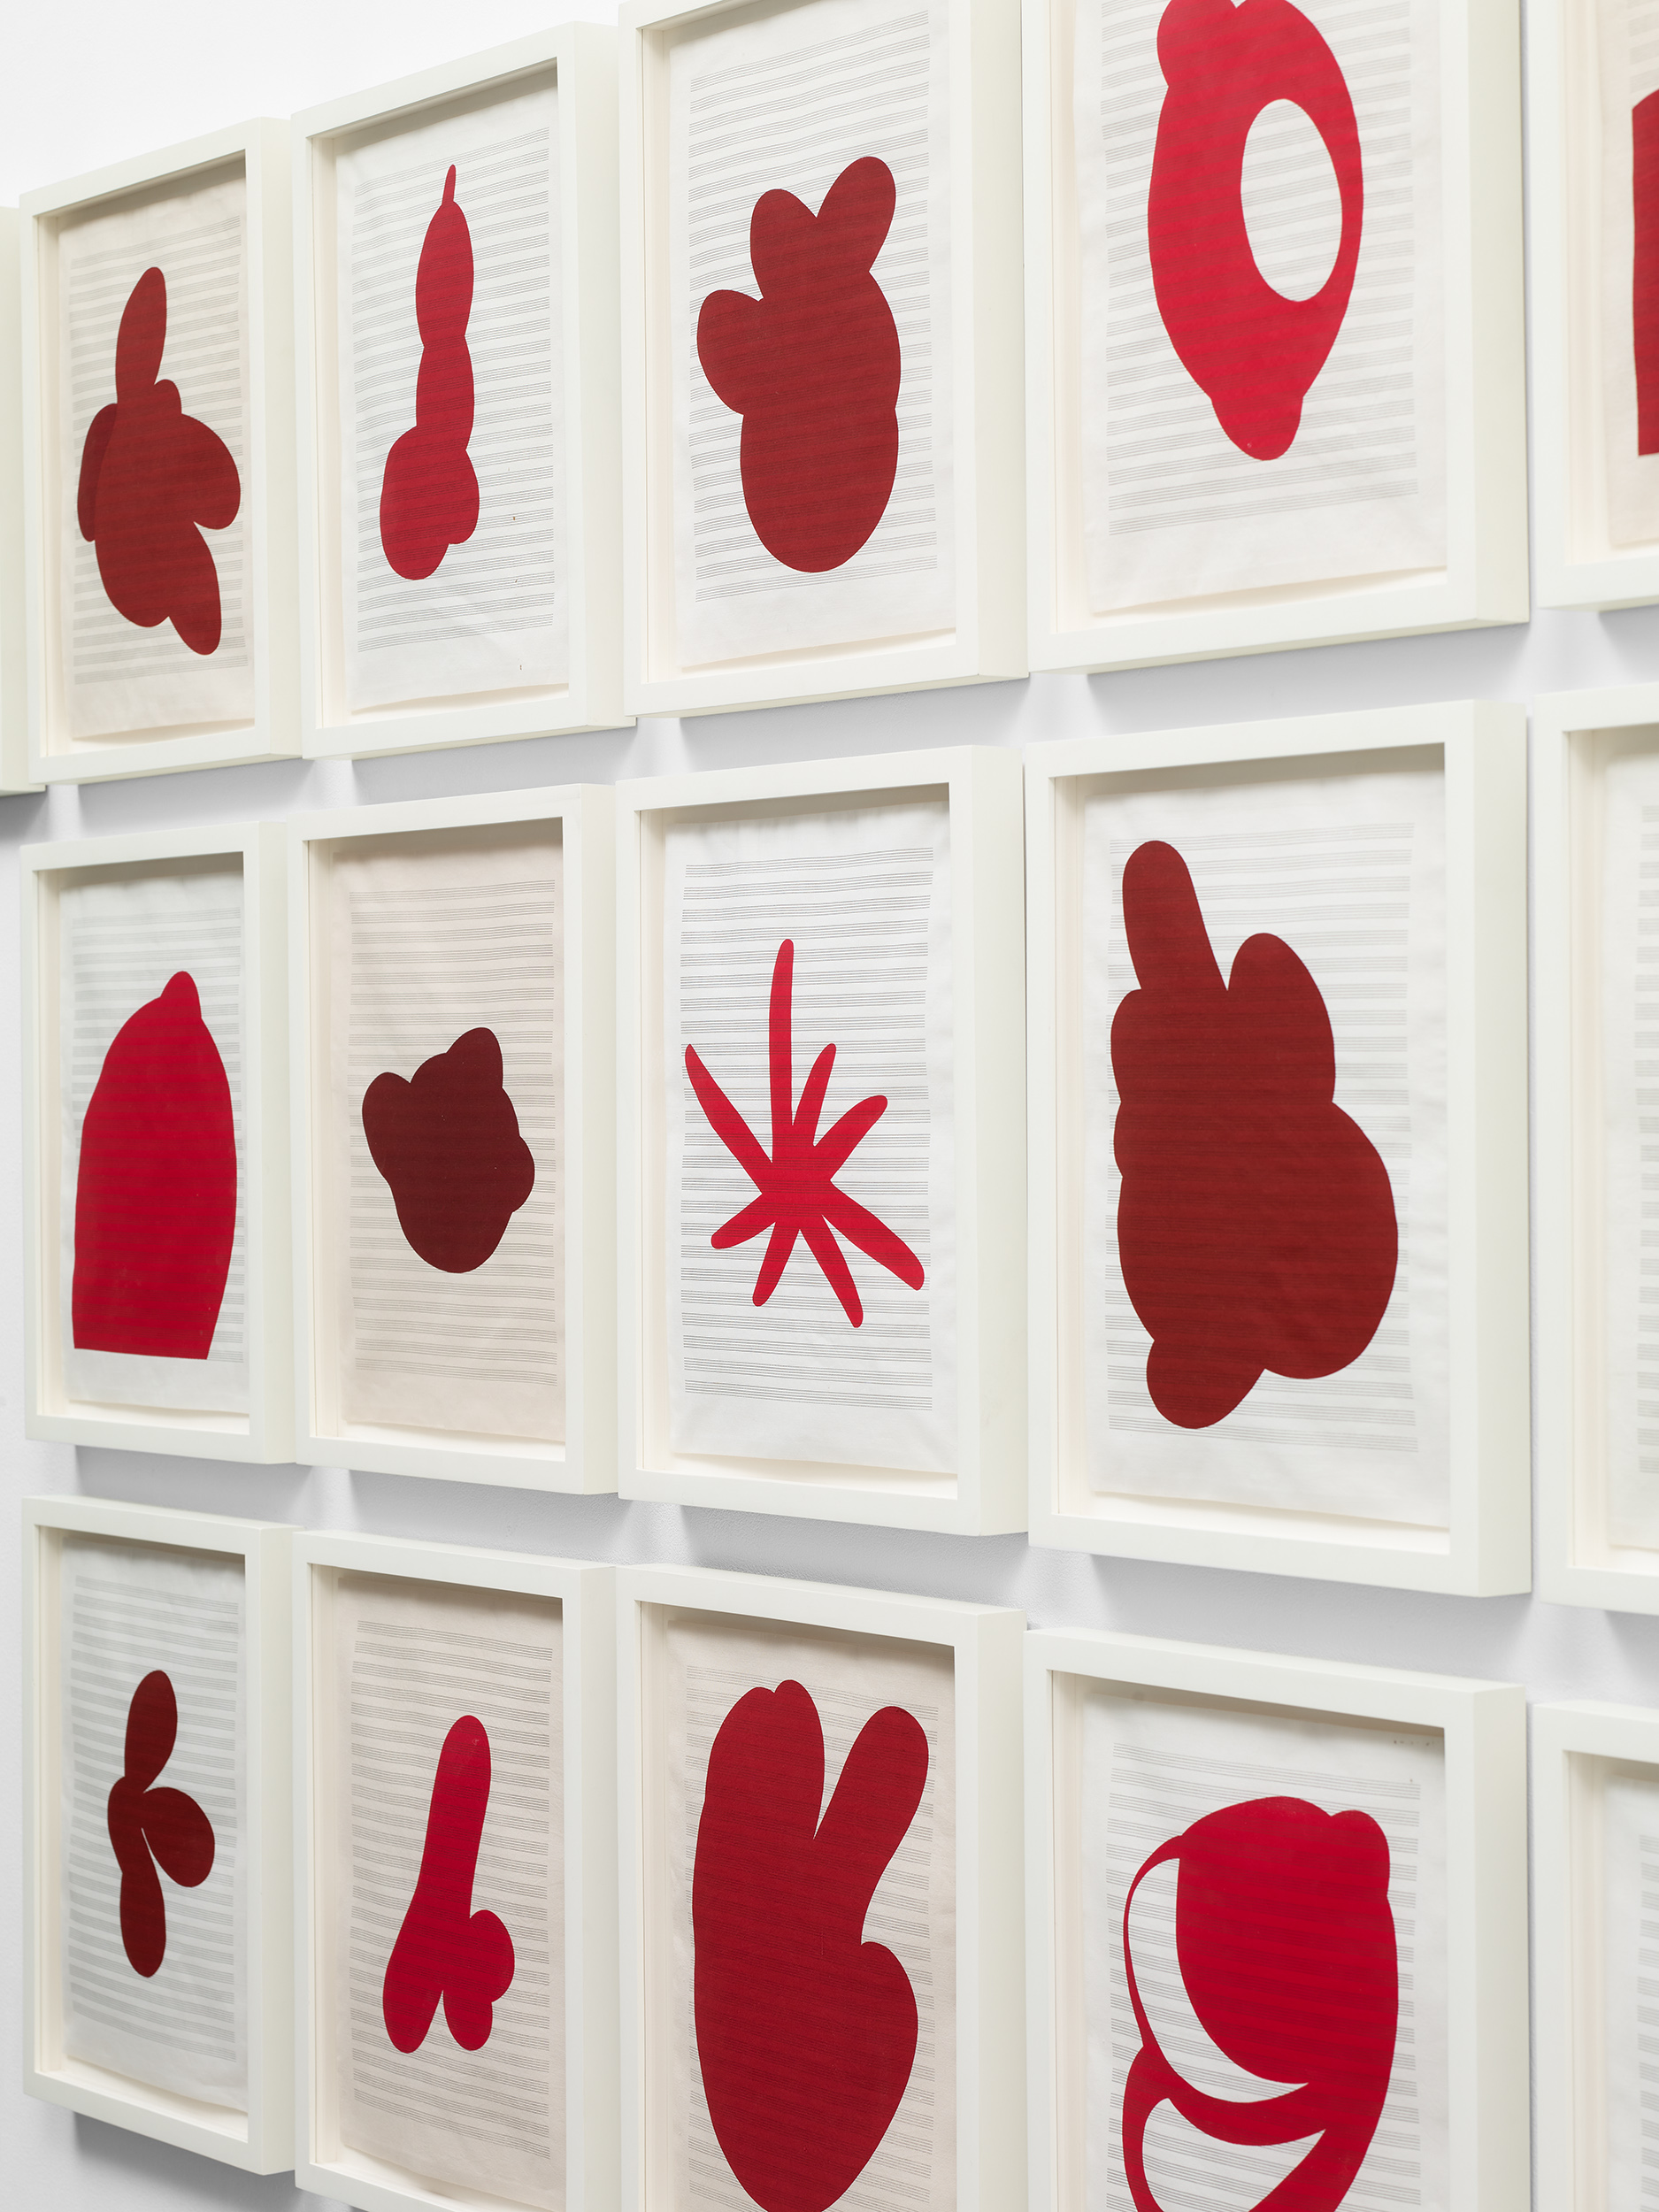 Detail view of Louise Bourgeois's series of 25 screen prints Lullaby